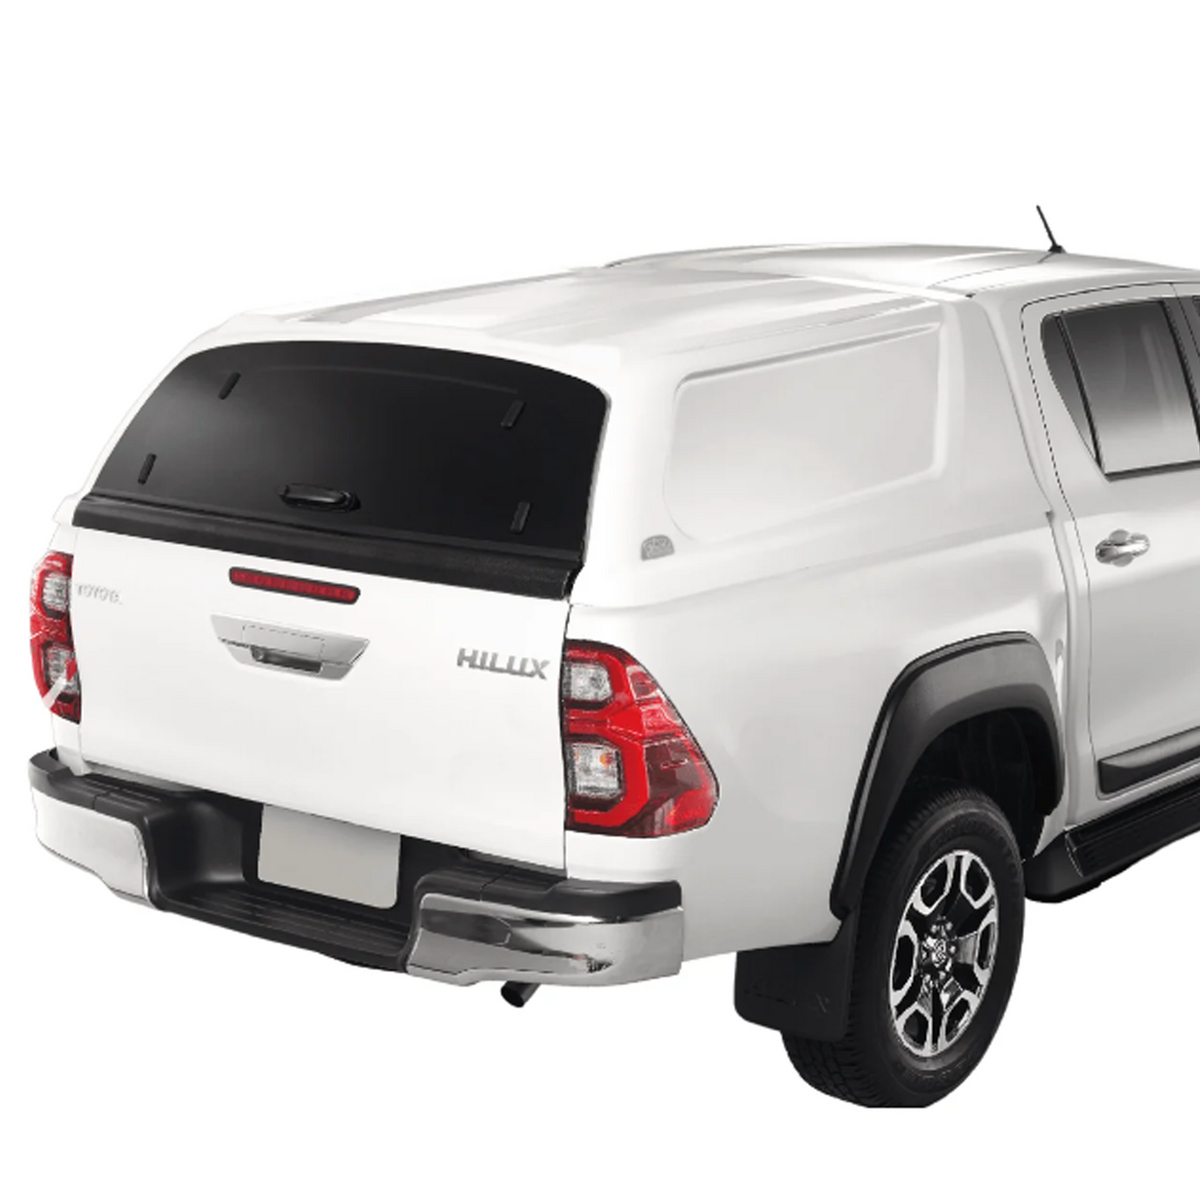 Ridgeback E-series Hardtop For Toyota Hilux Double Cab 2015 On